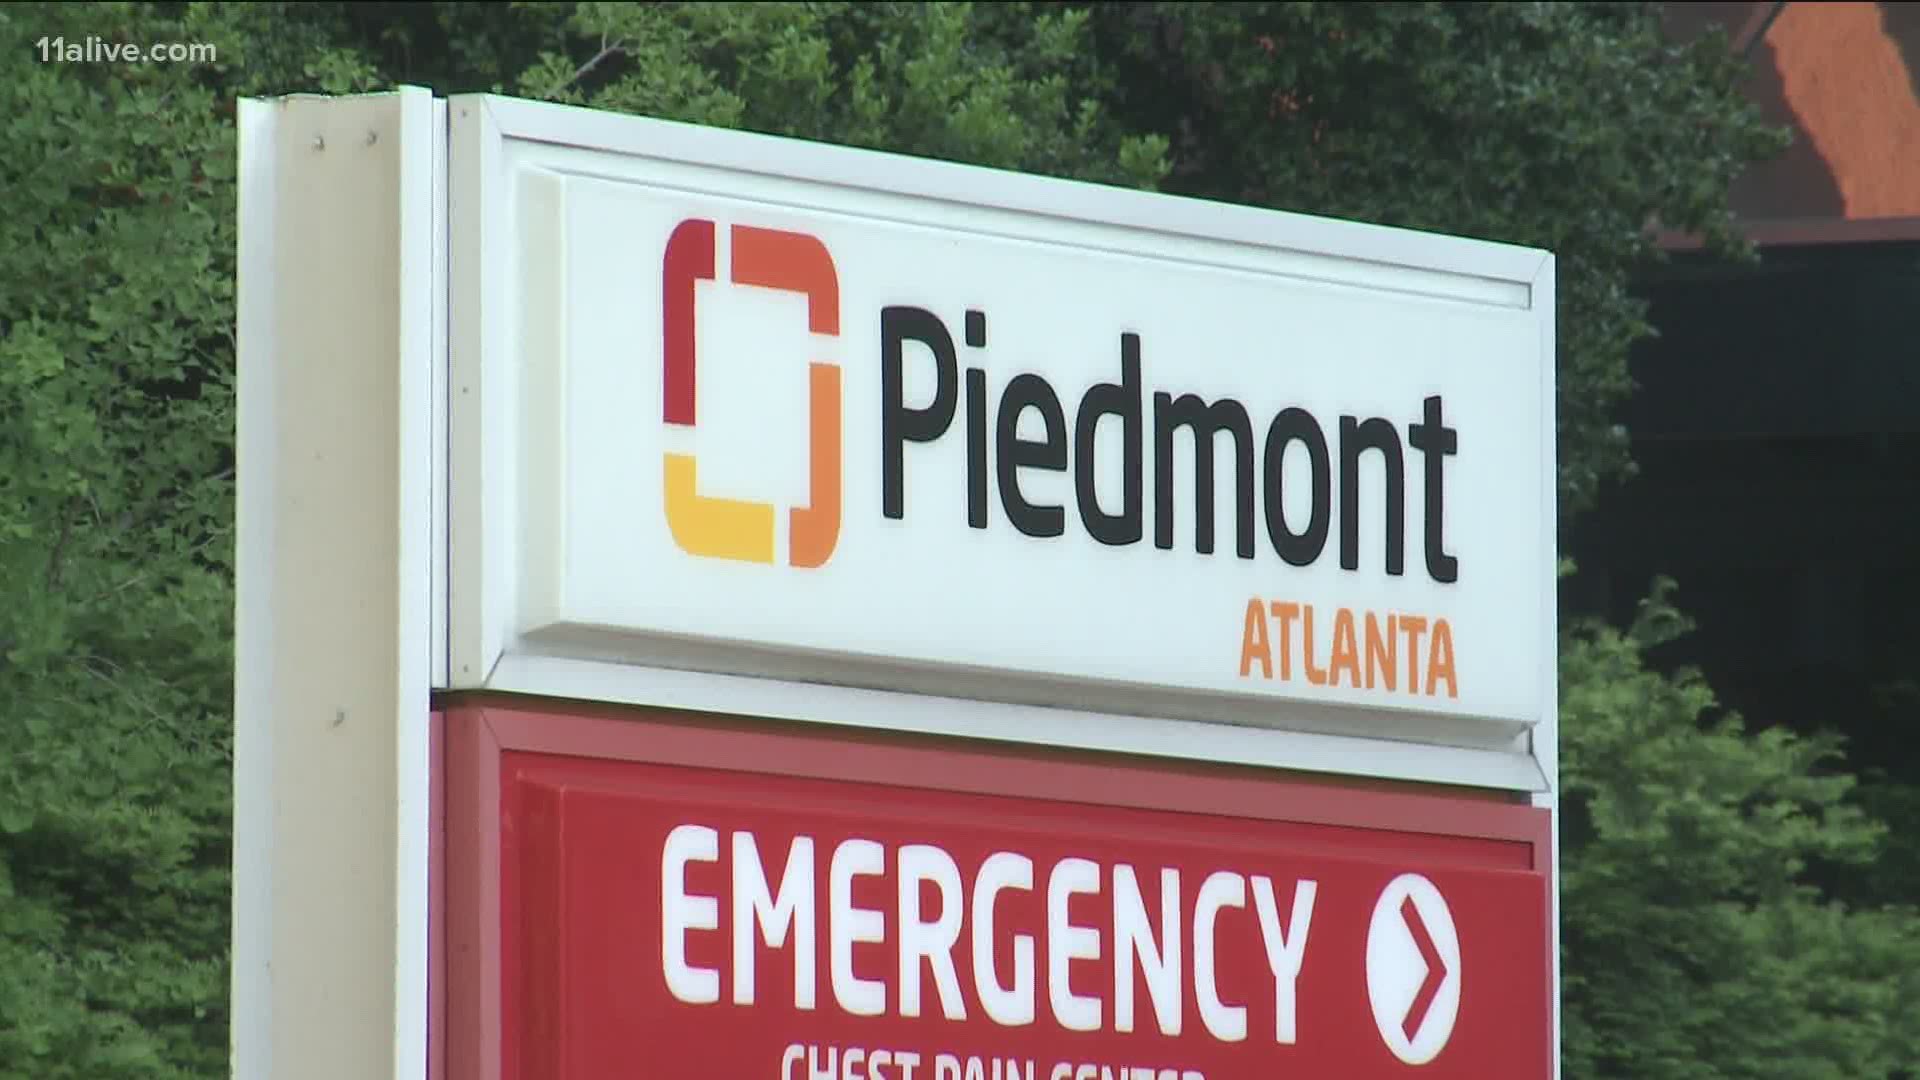 The termination will affect all piedmont inpatient facilities.